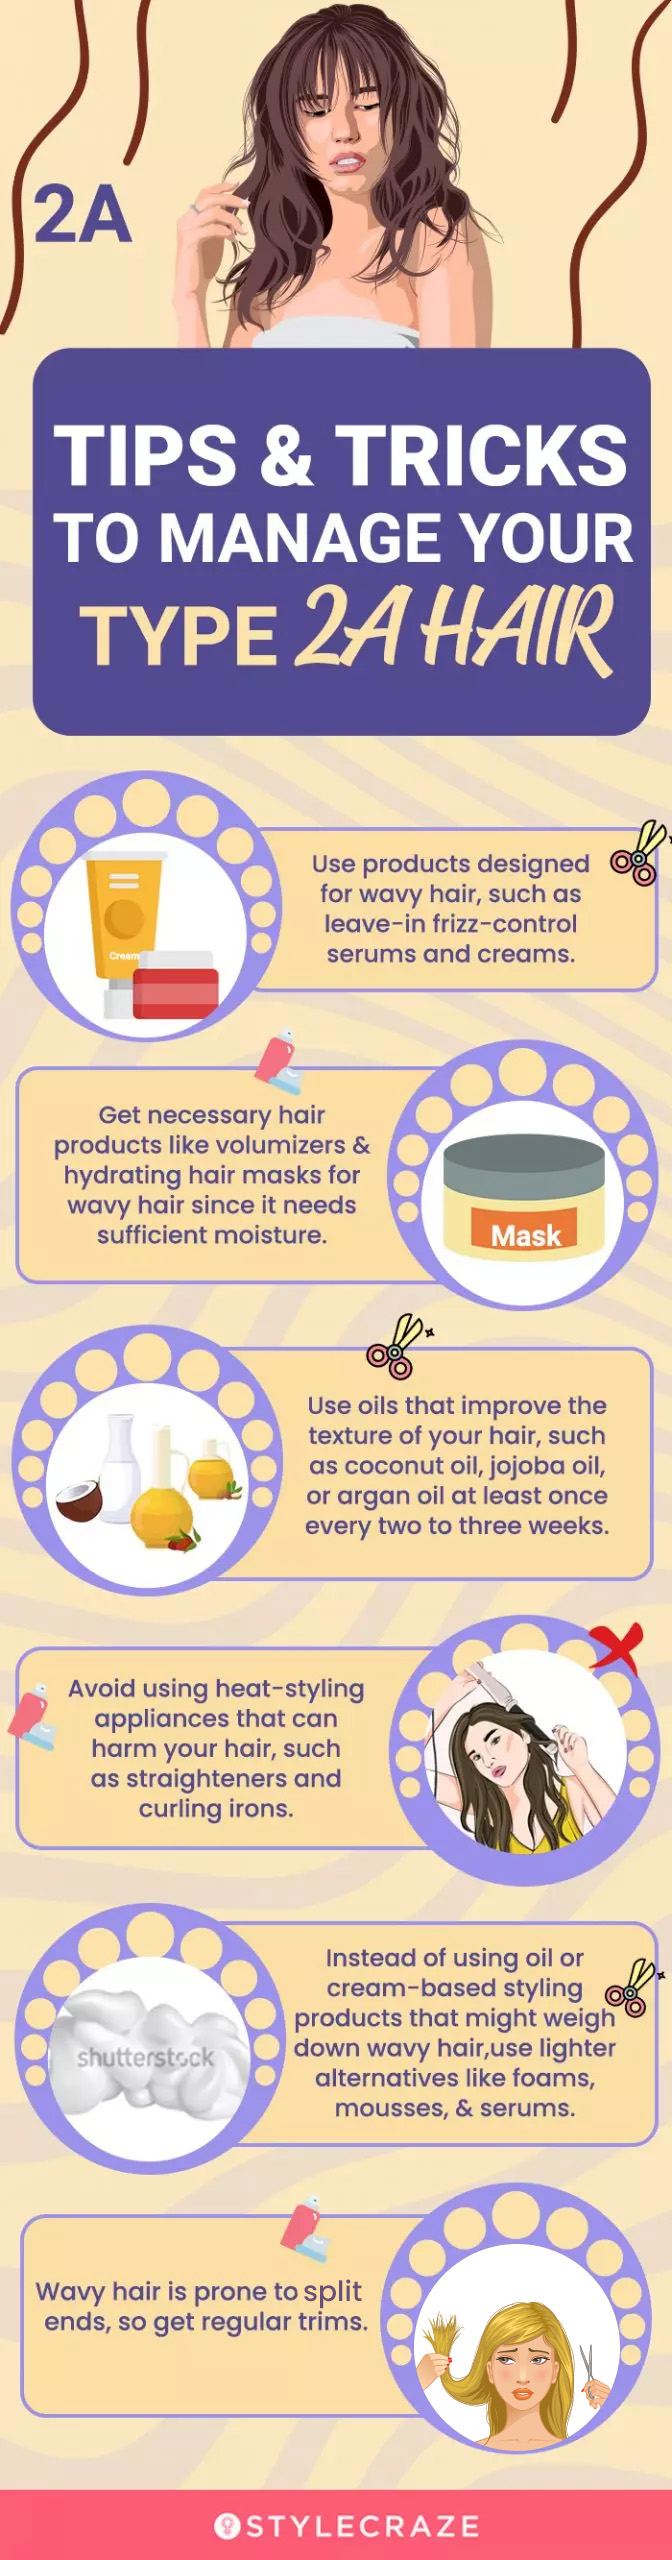 tips and tricks to manage your type 2a hair (infographic)